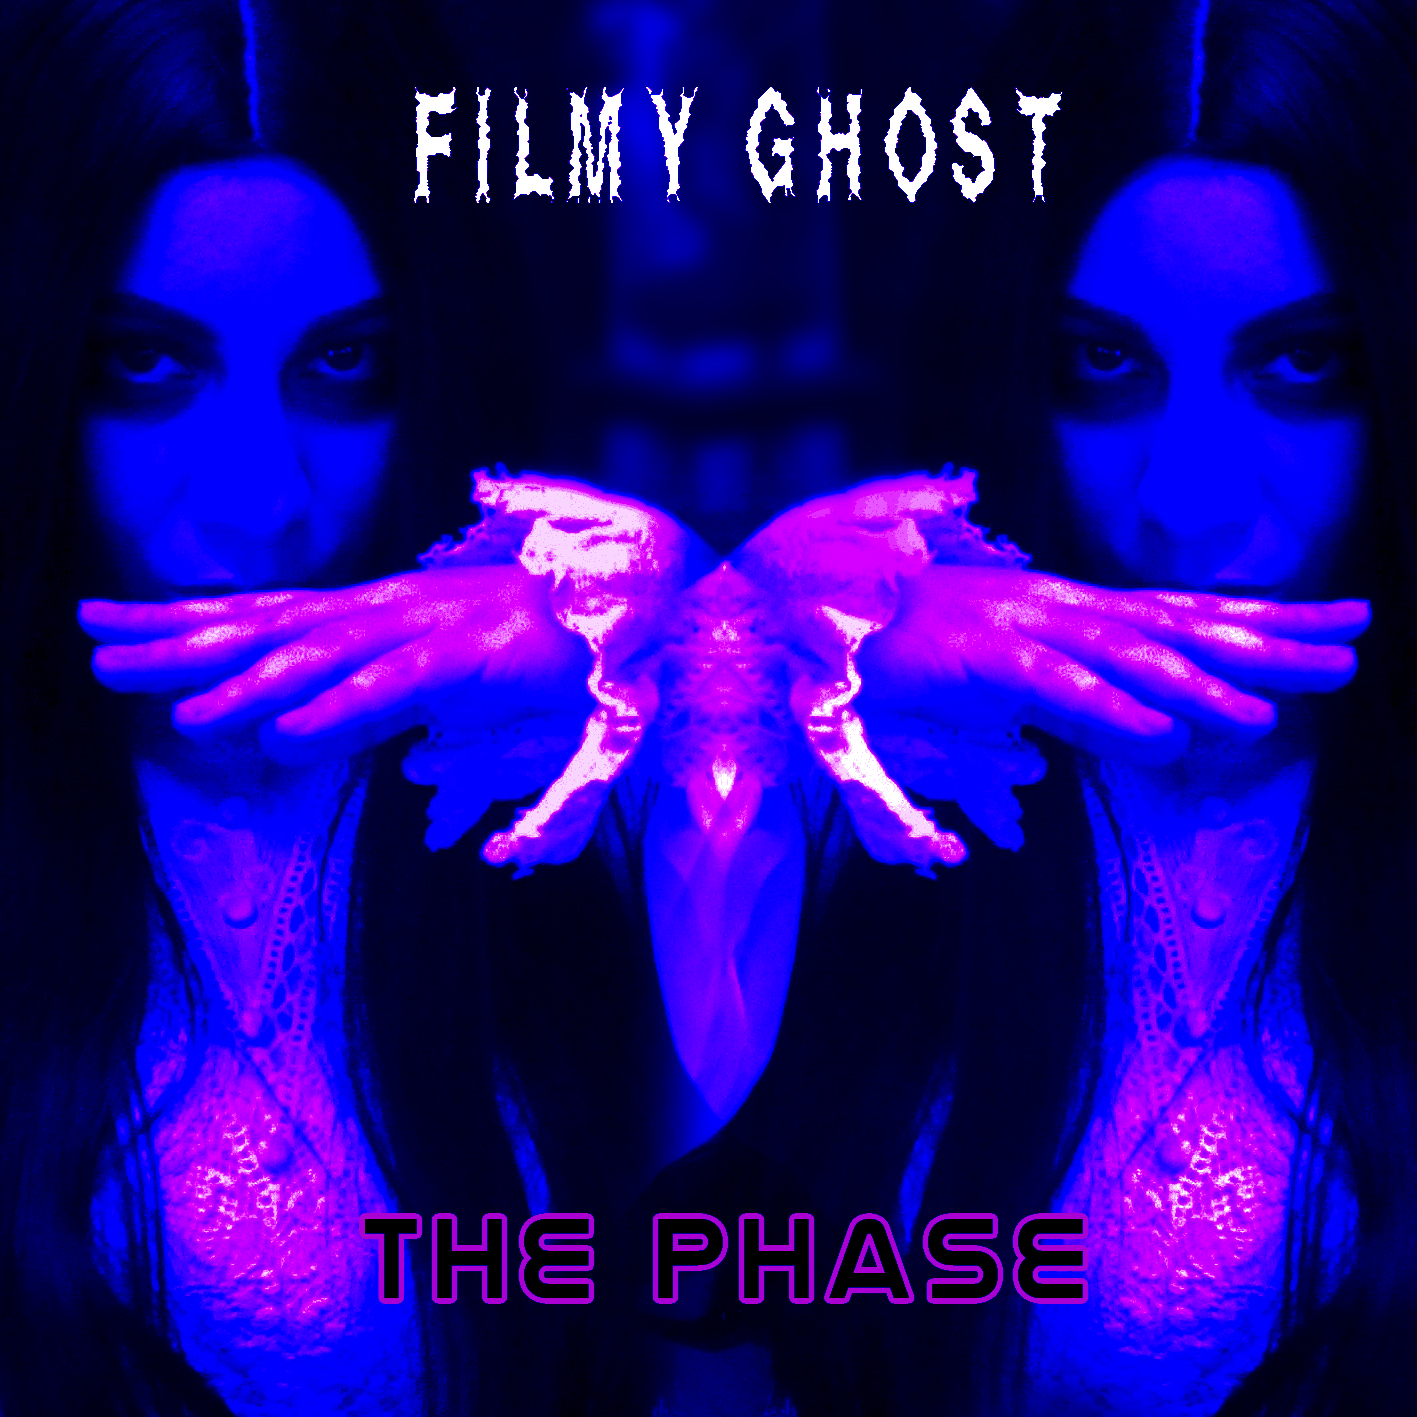 Filmy ghost – The Phase